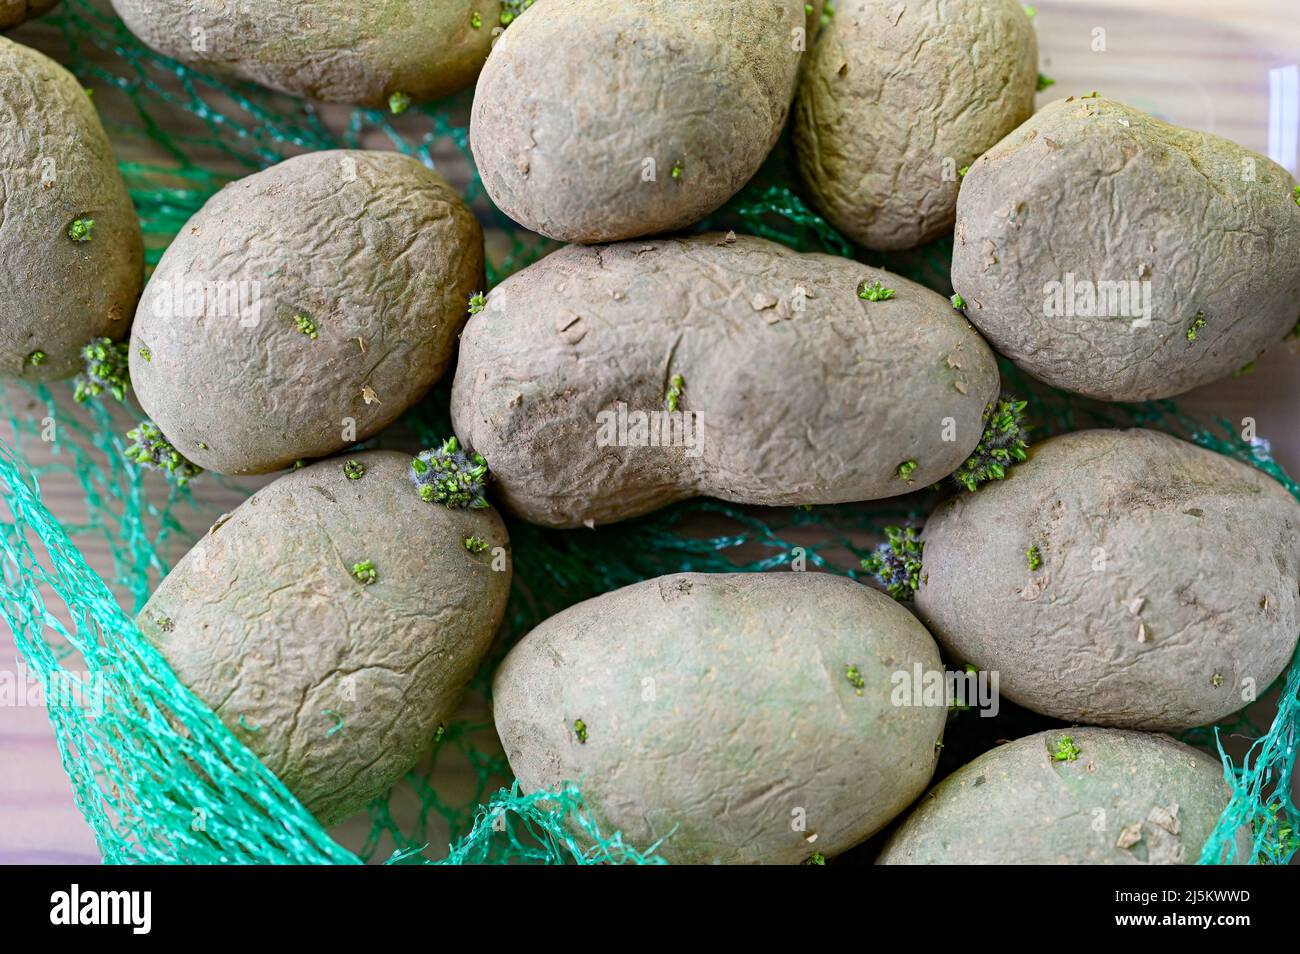 pre cultivating potatoes indoors before outdoor planting Stock Photo